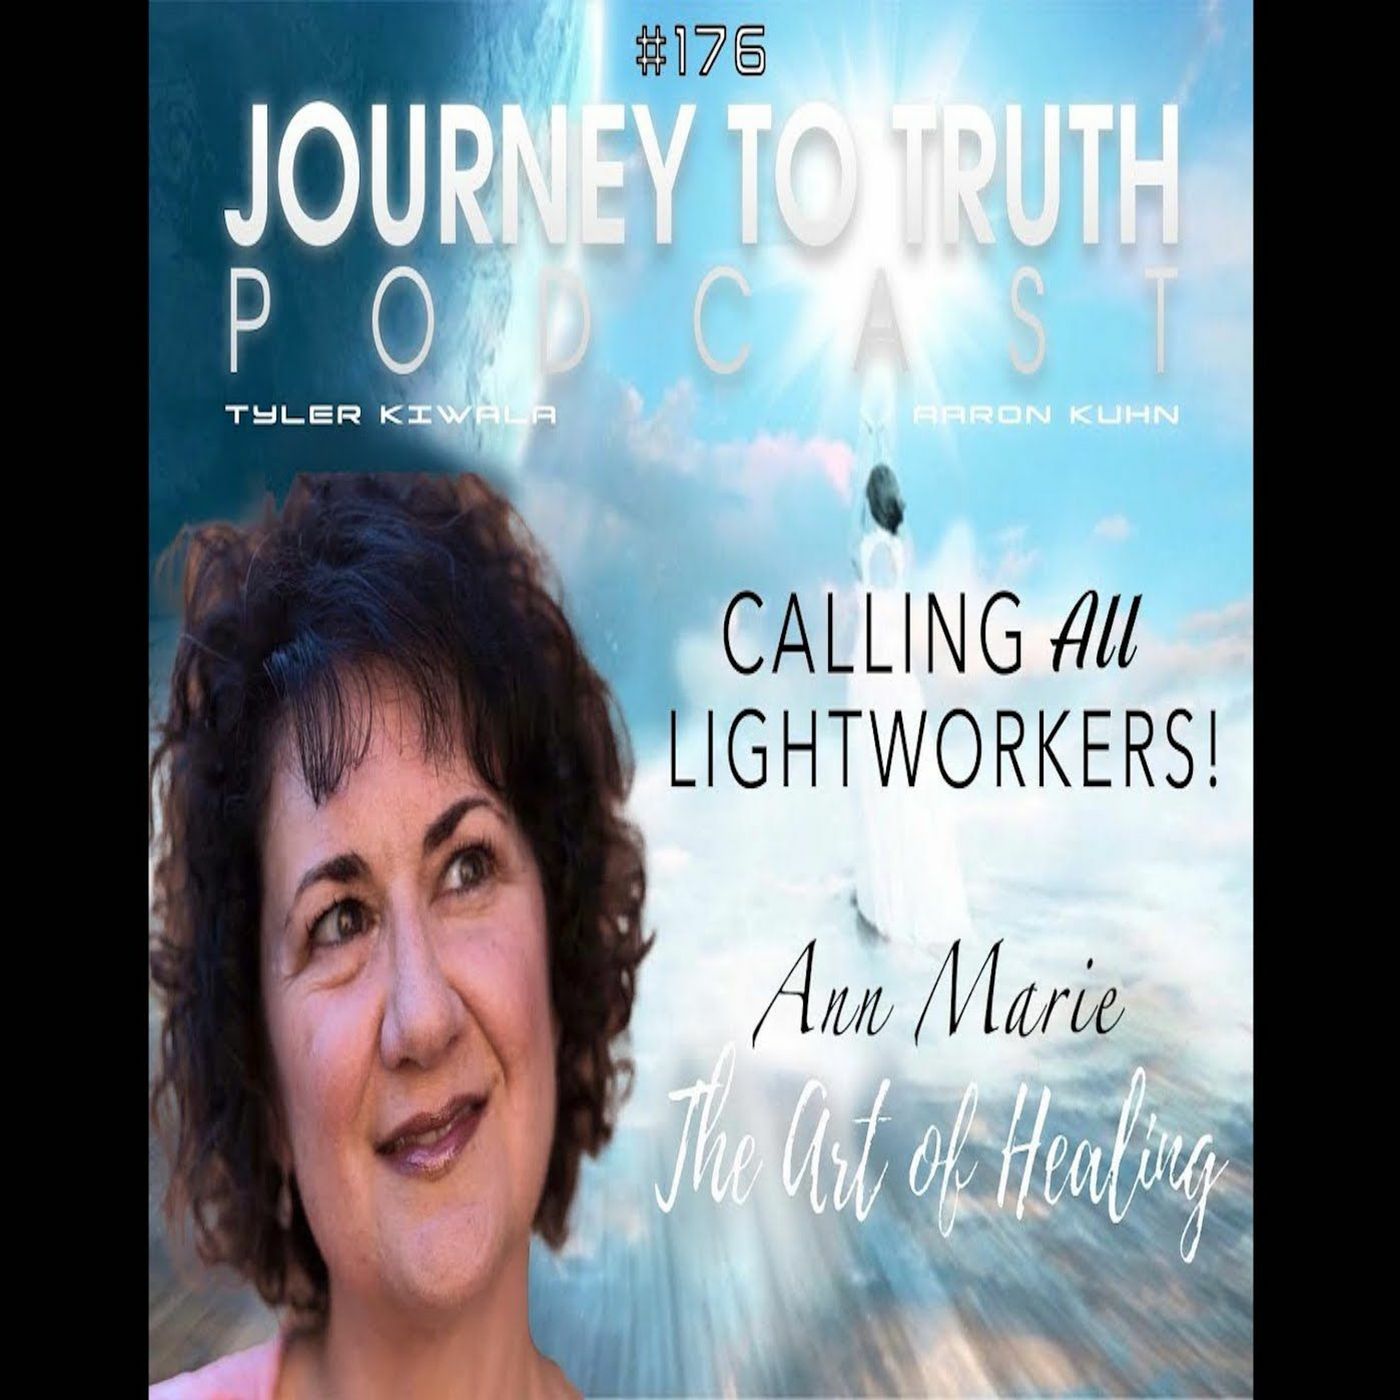 EP 176 - Ann Marie  The Art Of Healing - Calling All Lightworkers!